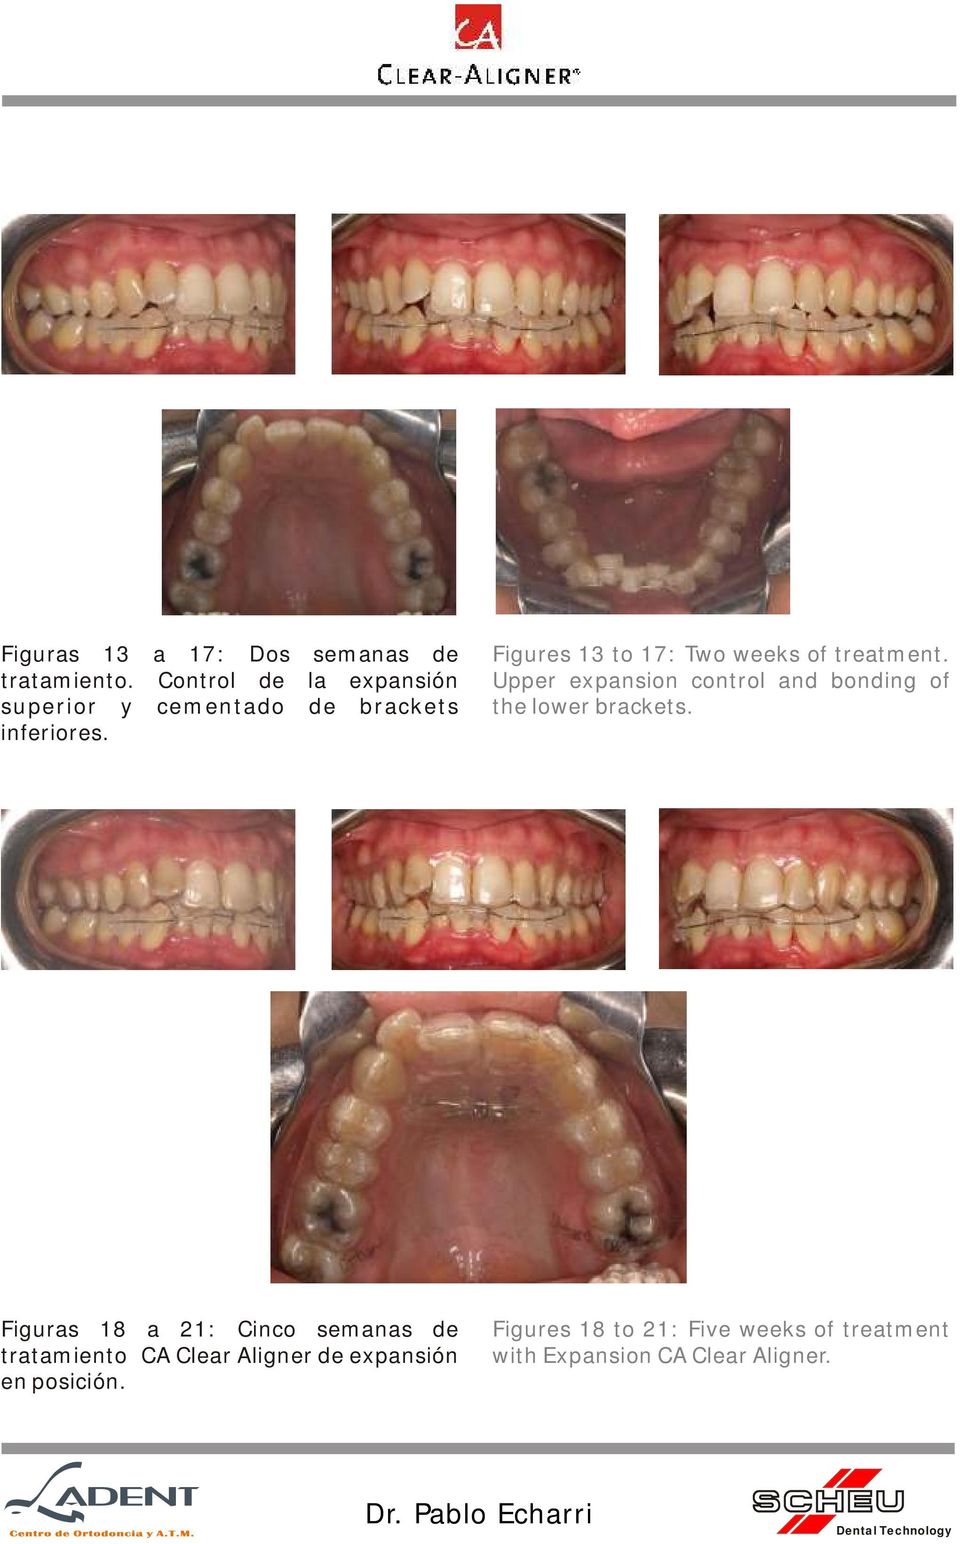 Figures 13 to 17: Two weeks of treatment.